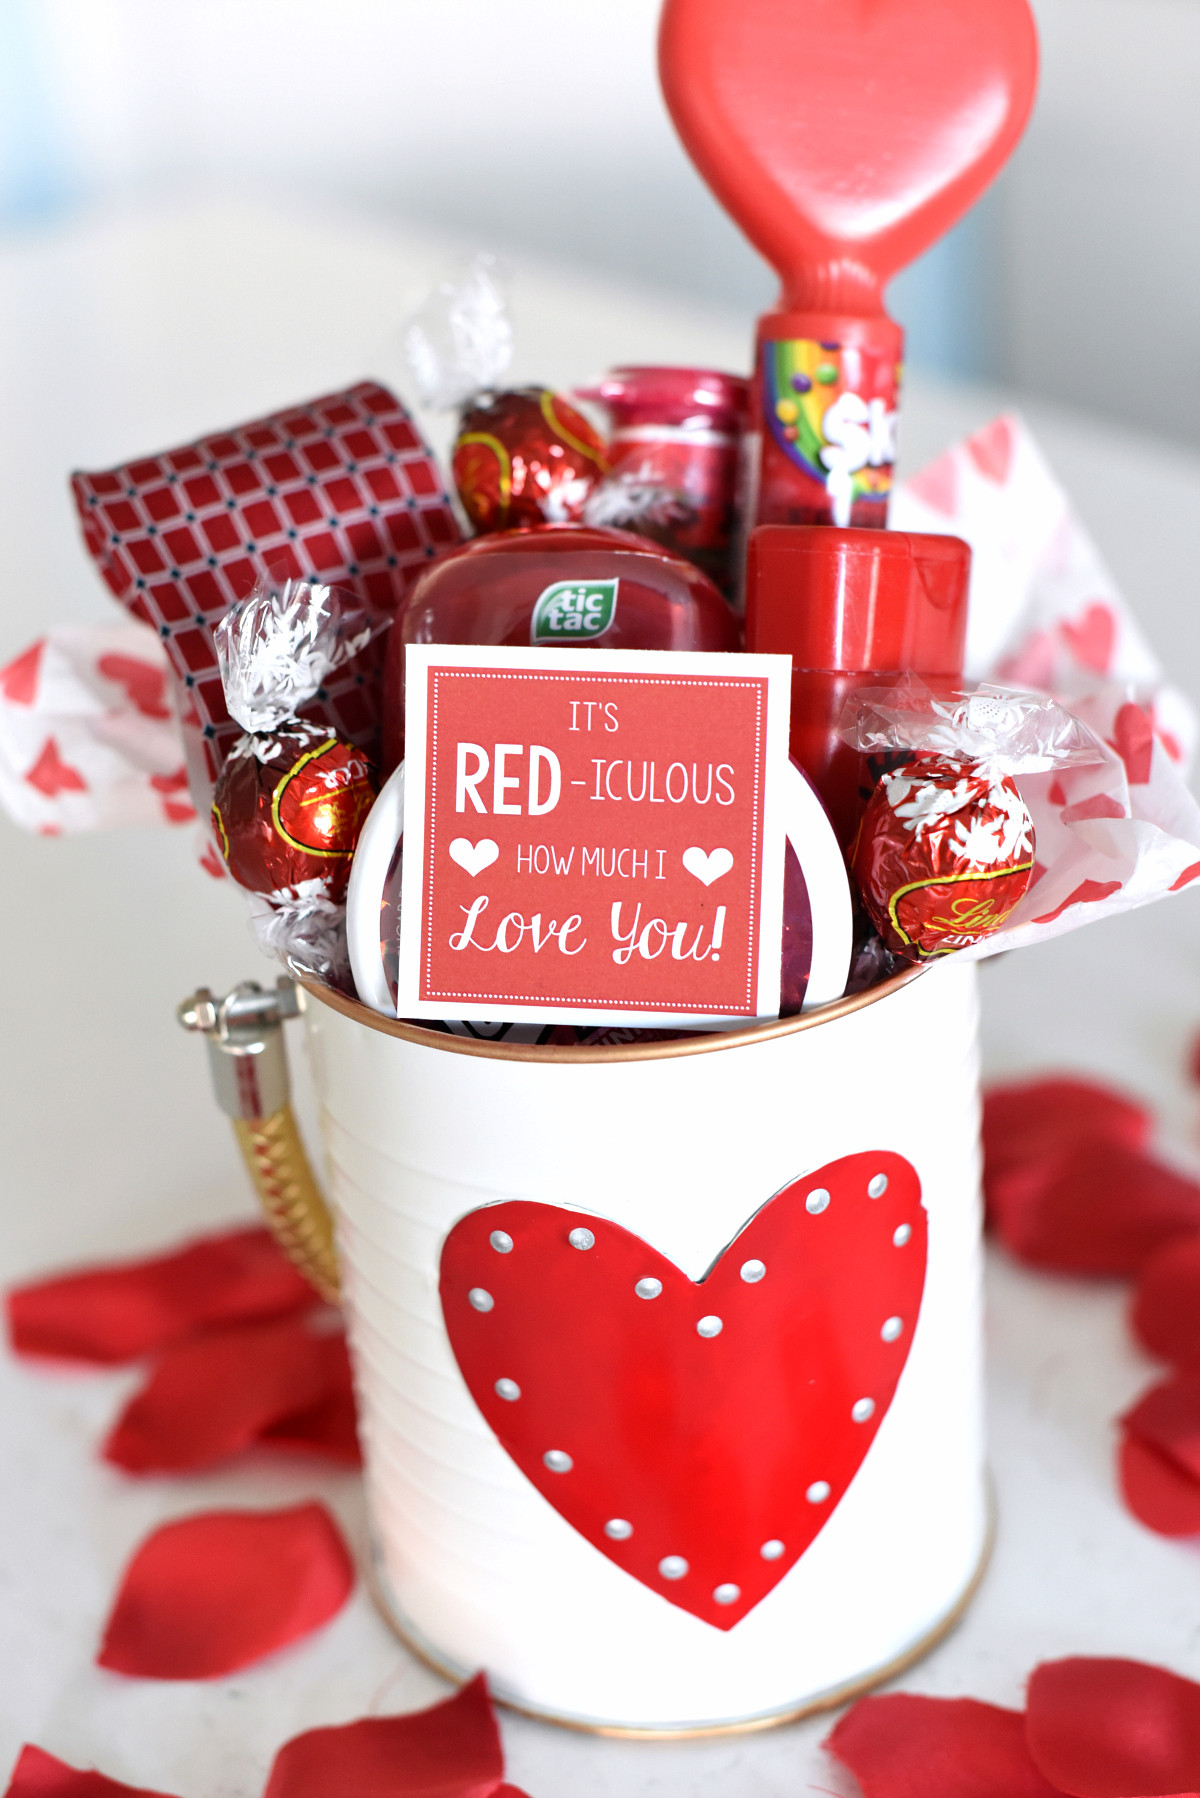 Valentine Day Gift Ideas For Kids
 Cute Valentine s Day Gift Idea RED iculous Basket